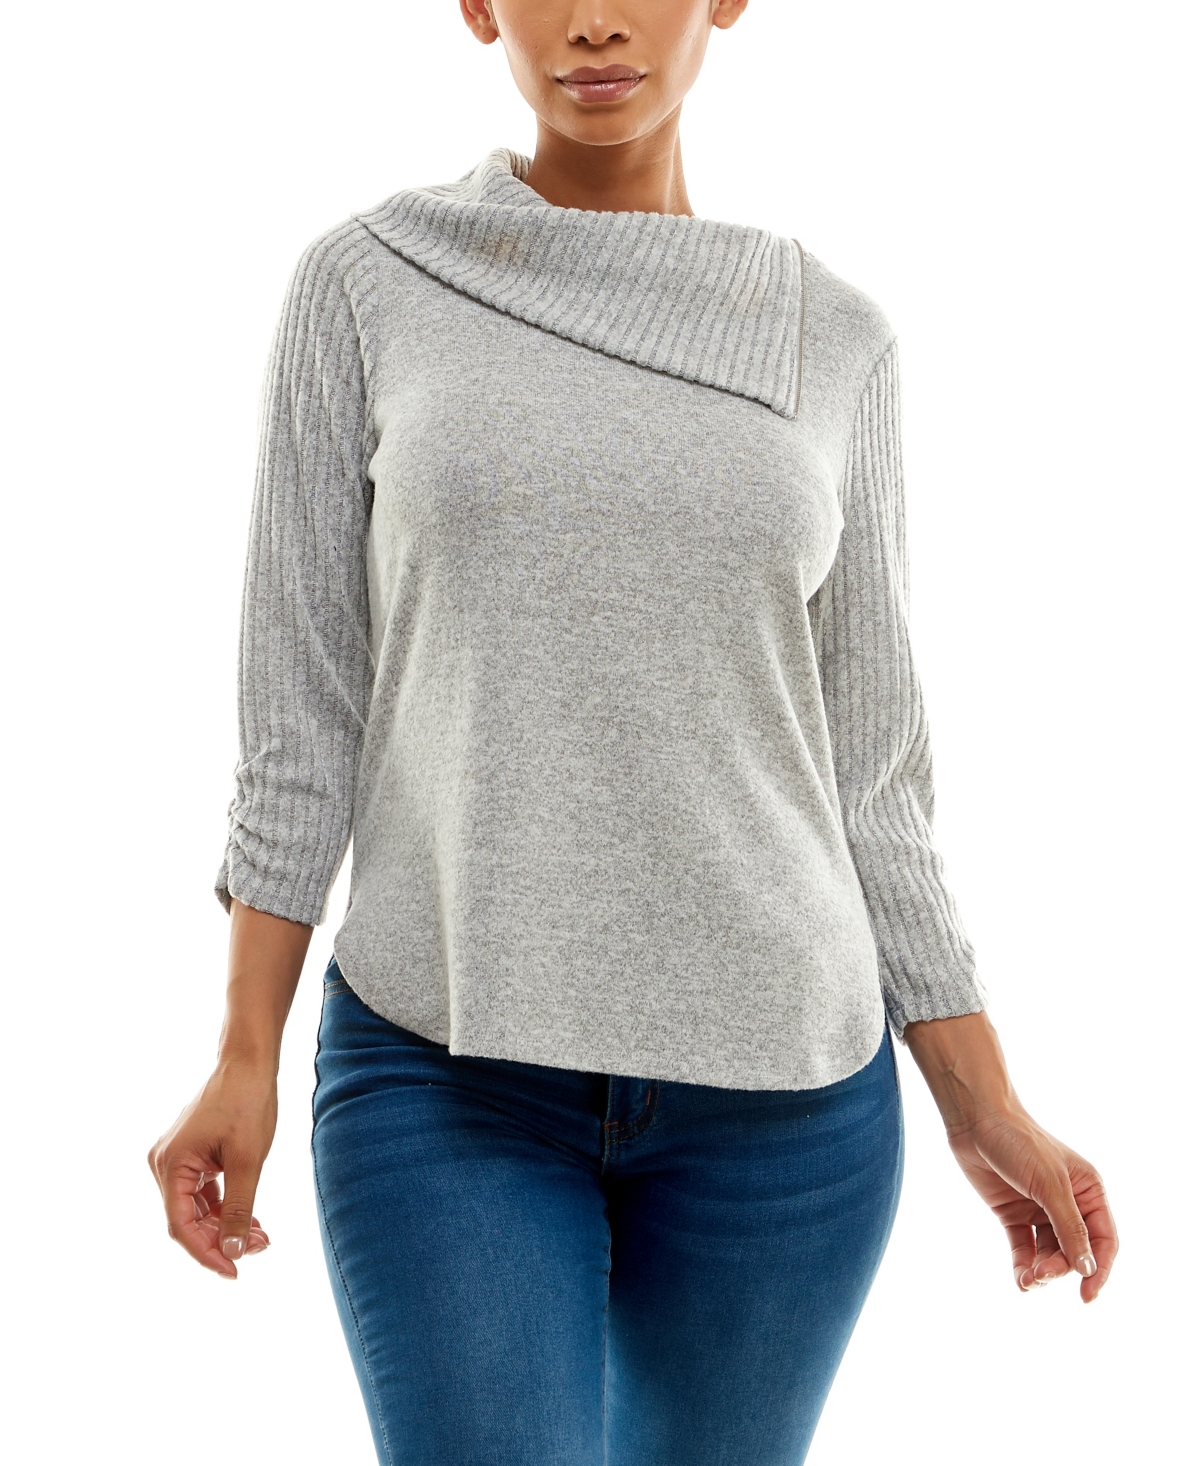 Adrienne Vittadini Women's 3/4 Sleeve Zippered Collar Top With Rib Sleeves In Light Gray Heather